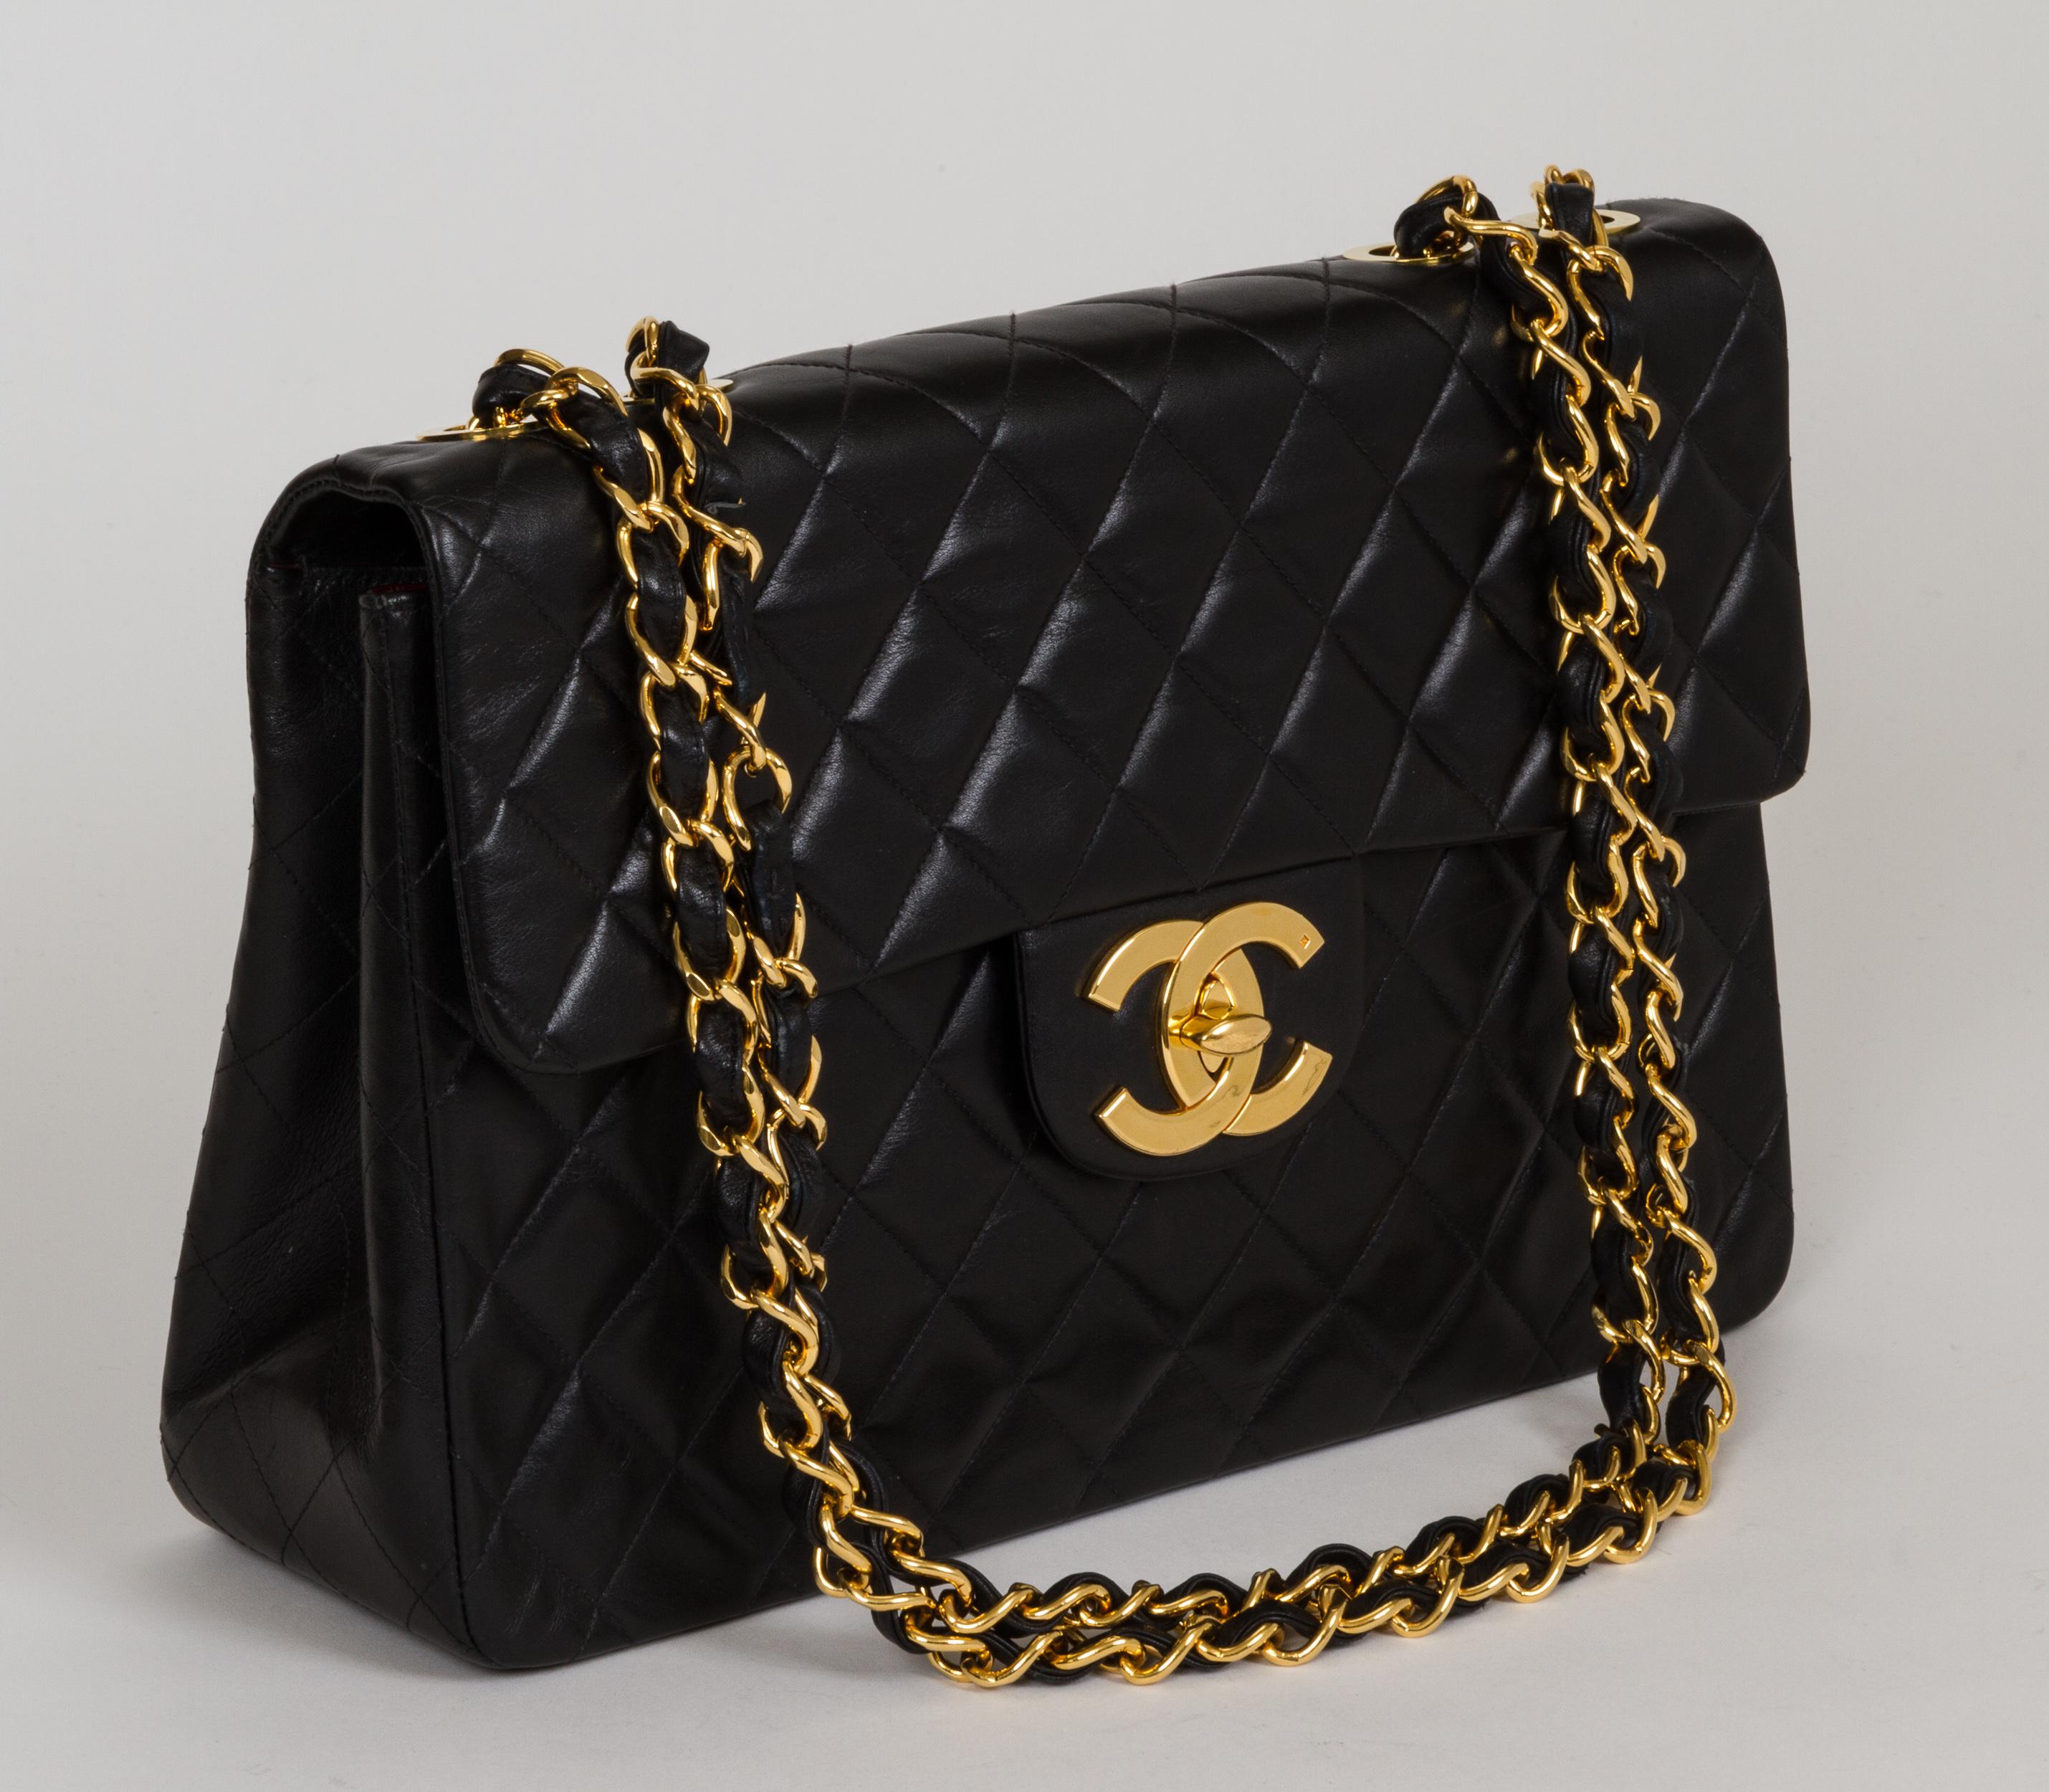 Chanel classic maxi flap bag with signature oversize 